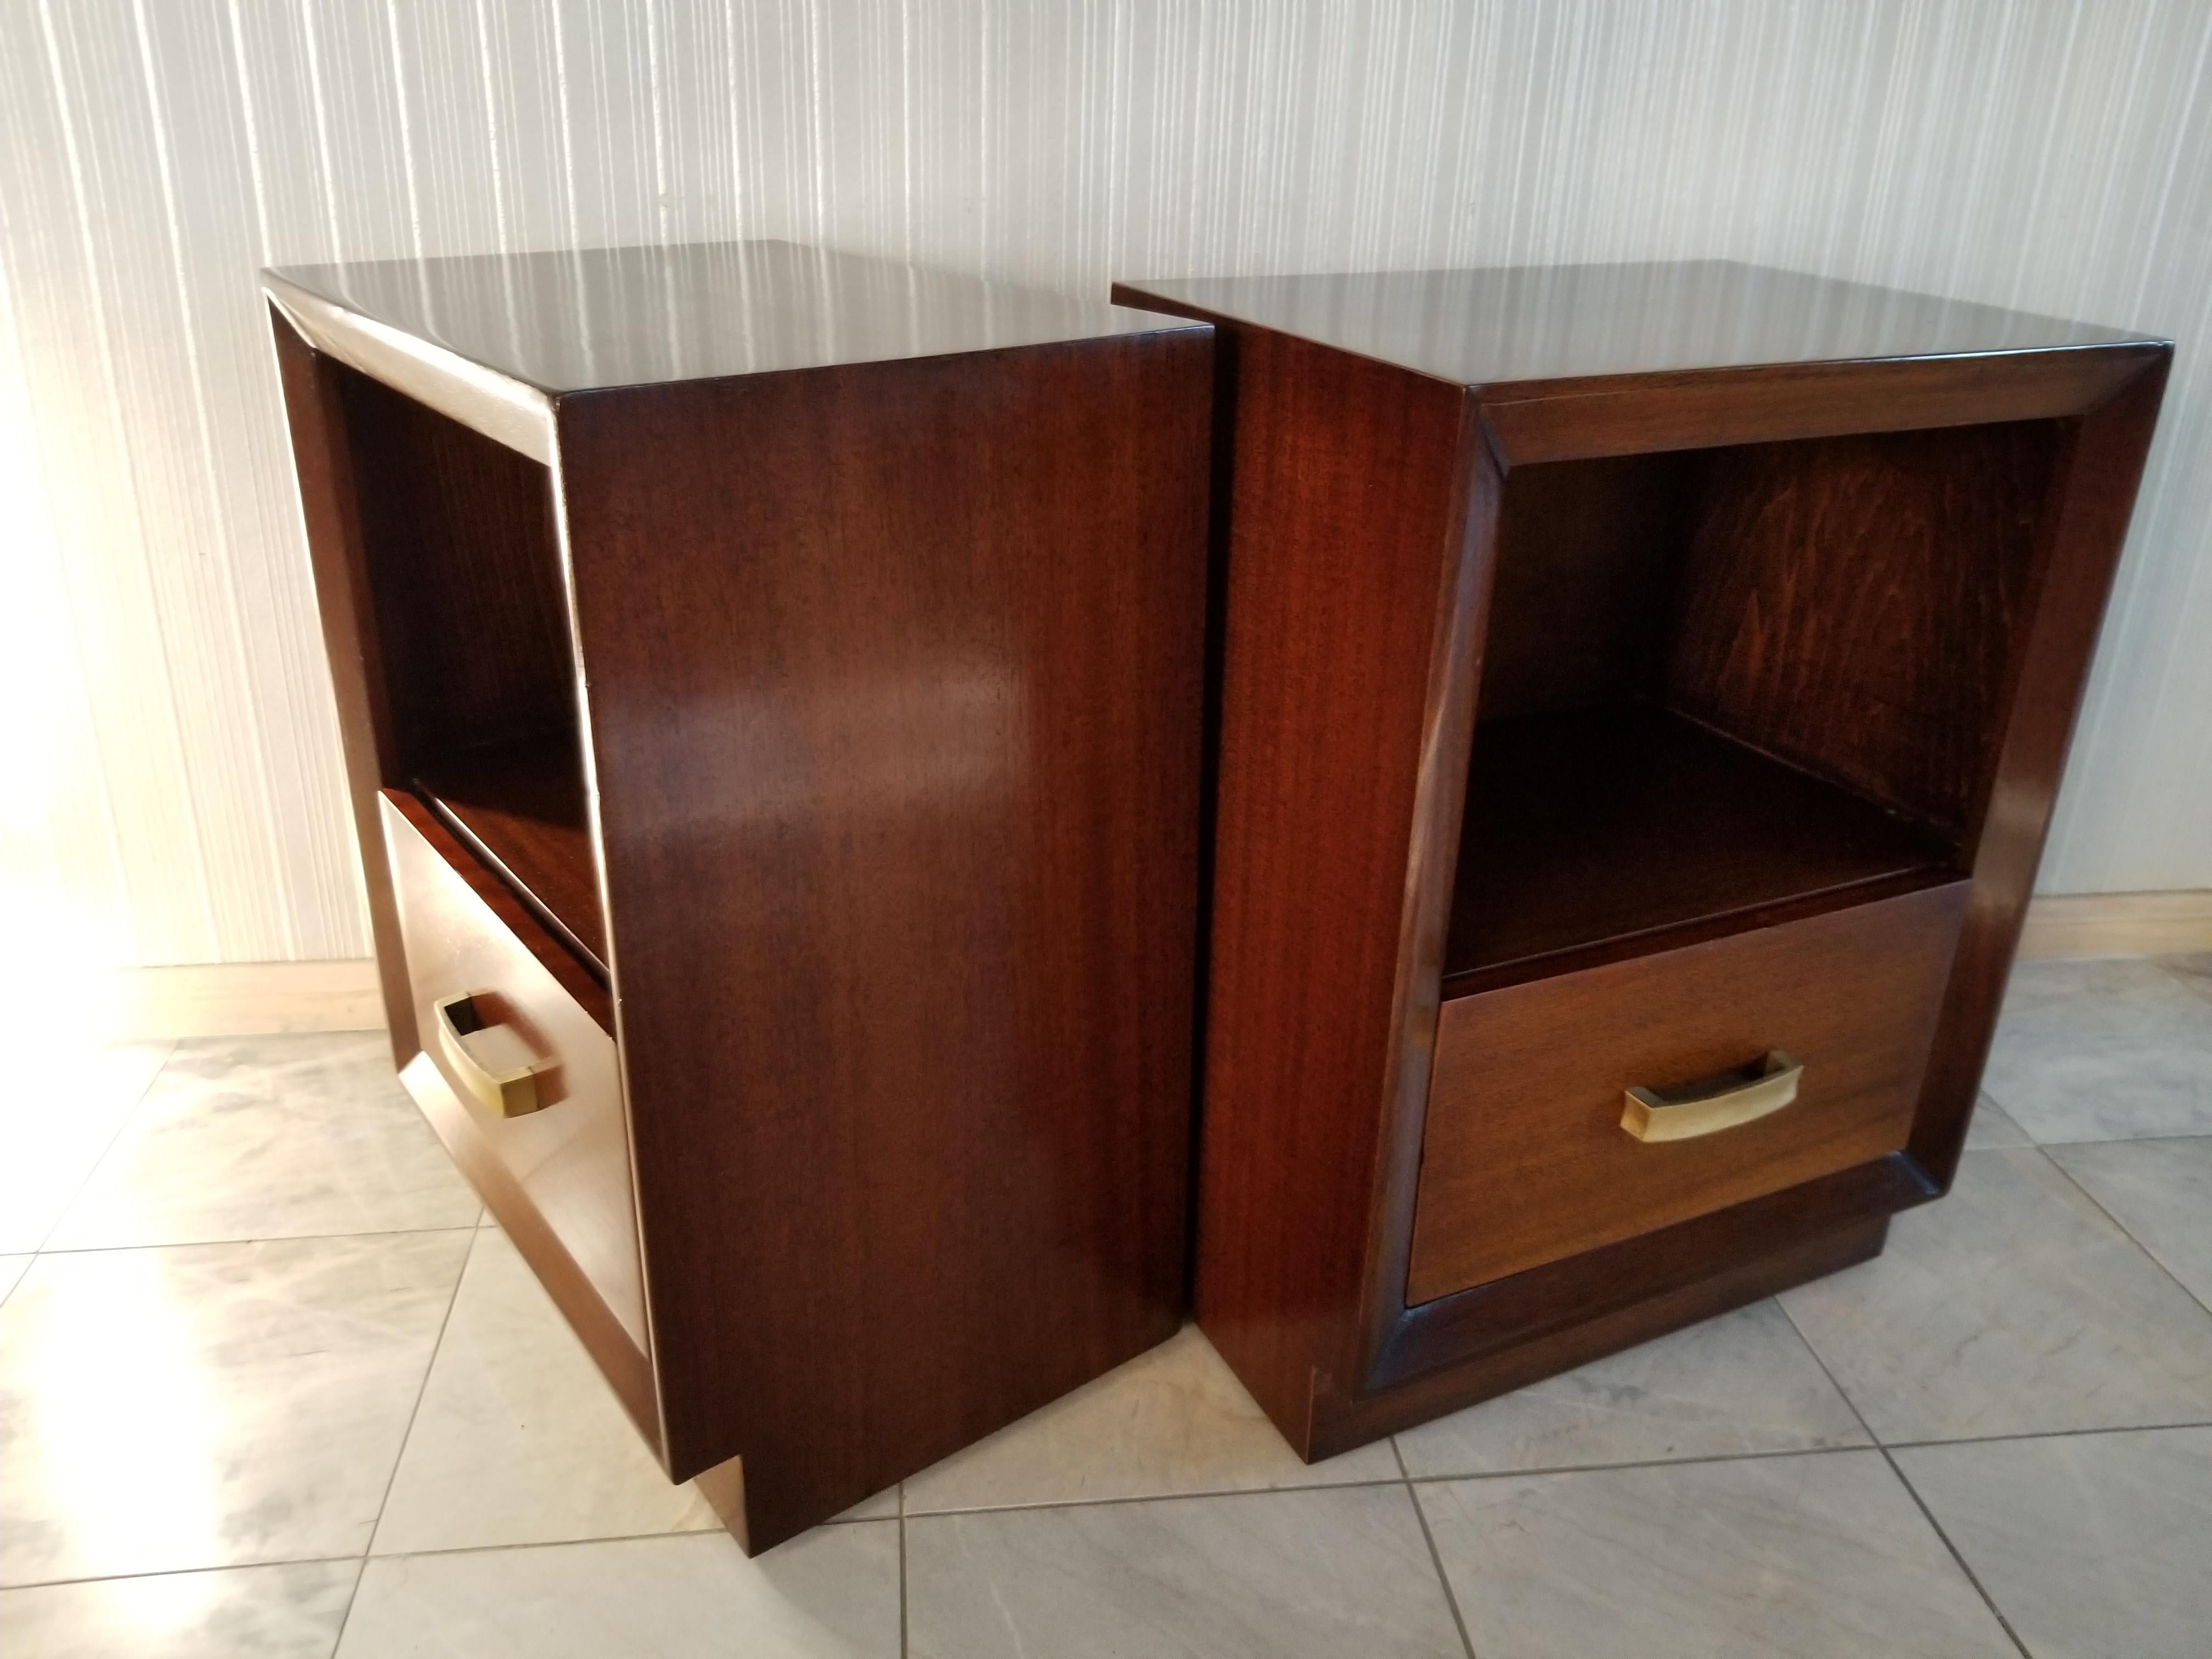 Elegance of the midcentury 1950s by famed high end retailer John Stuart of Grand Rapids, Michigan and New York; maker's metal label affixed.
Designed with spacious drawer and cubby area. Selling as a pair.
Retains original elegant brass pull handle